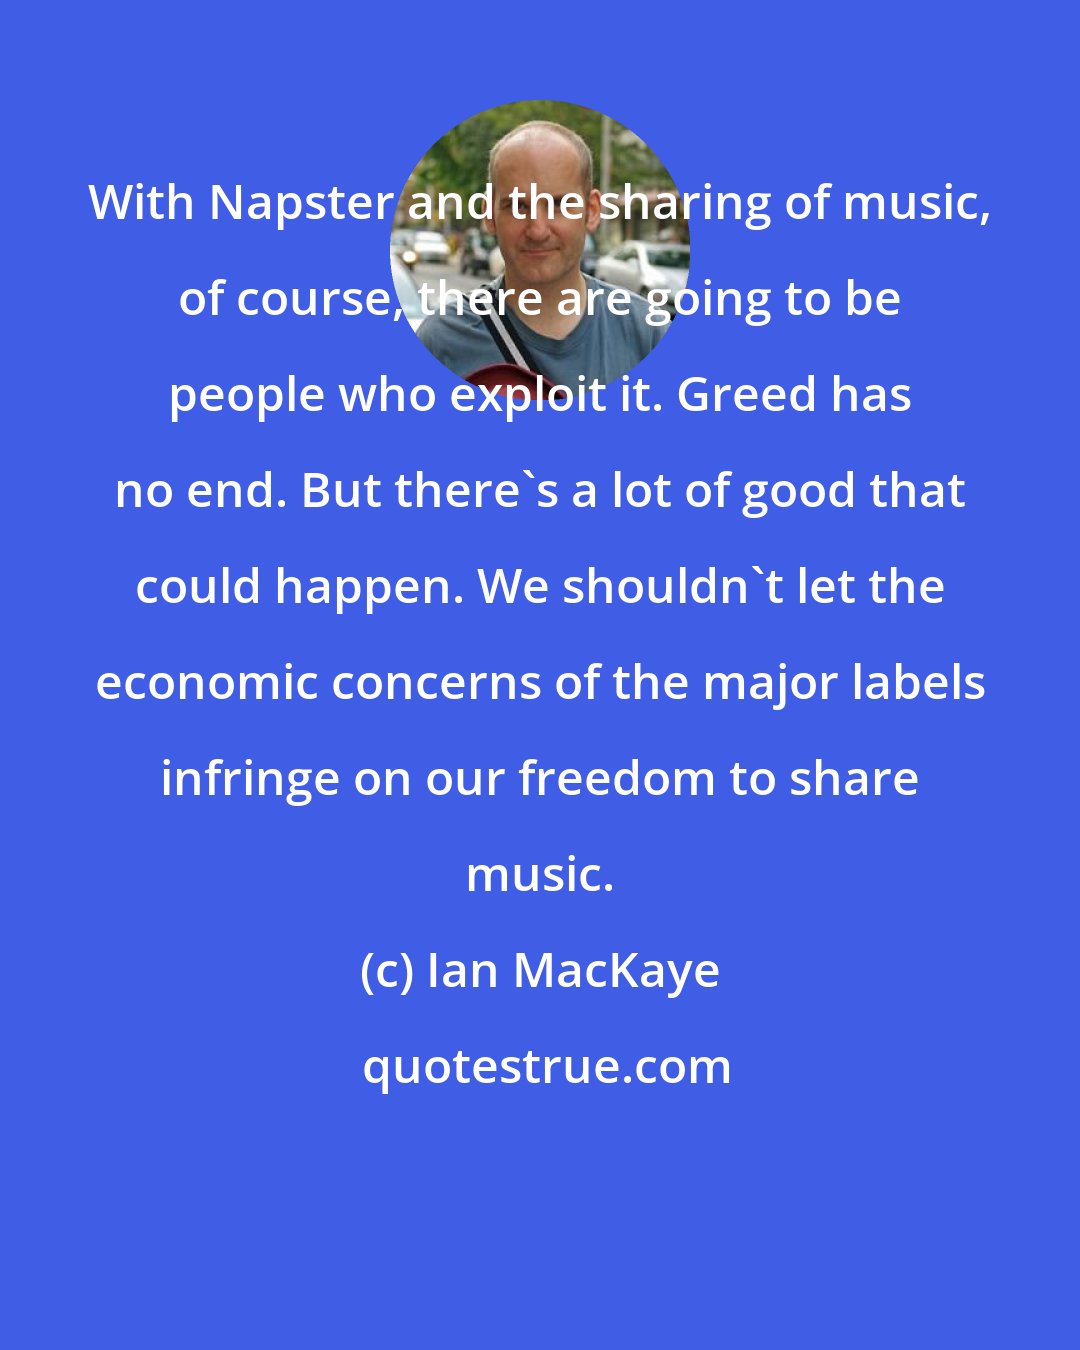 Ian MacKaye: With Napster and the sharing of music, of course, there are going to be people who exploit it. Greed has no end. But there's a lot of good that could happen. We shouldn't let the economic concerns of the major labels infringe on our freedom to share music.